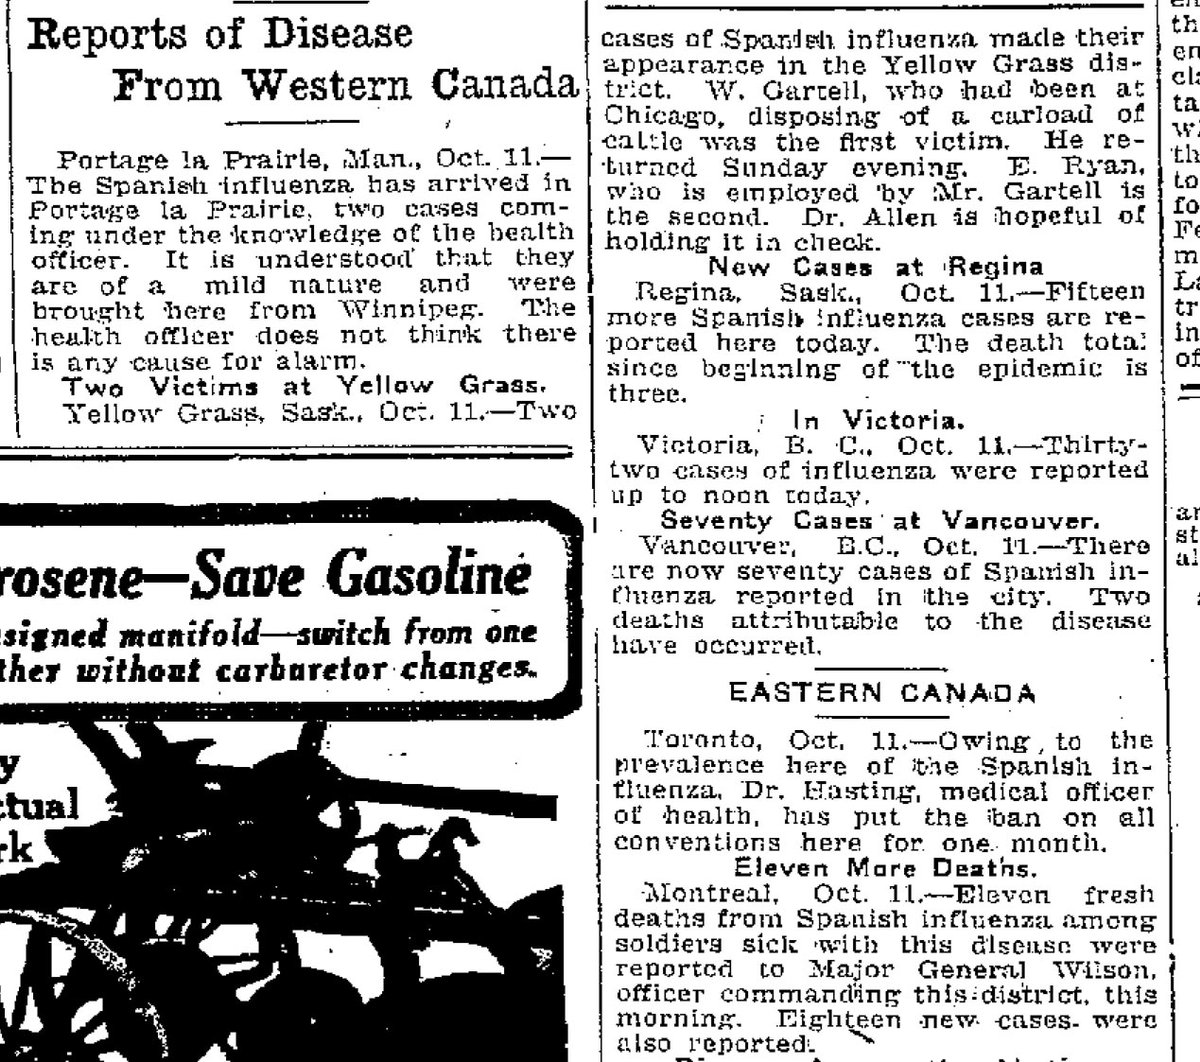 The newspapers watched closely what was happening across Canada. The fight against Spanish Flu was seen as a patriotic battle. This was happening at the same time as the war was ending.